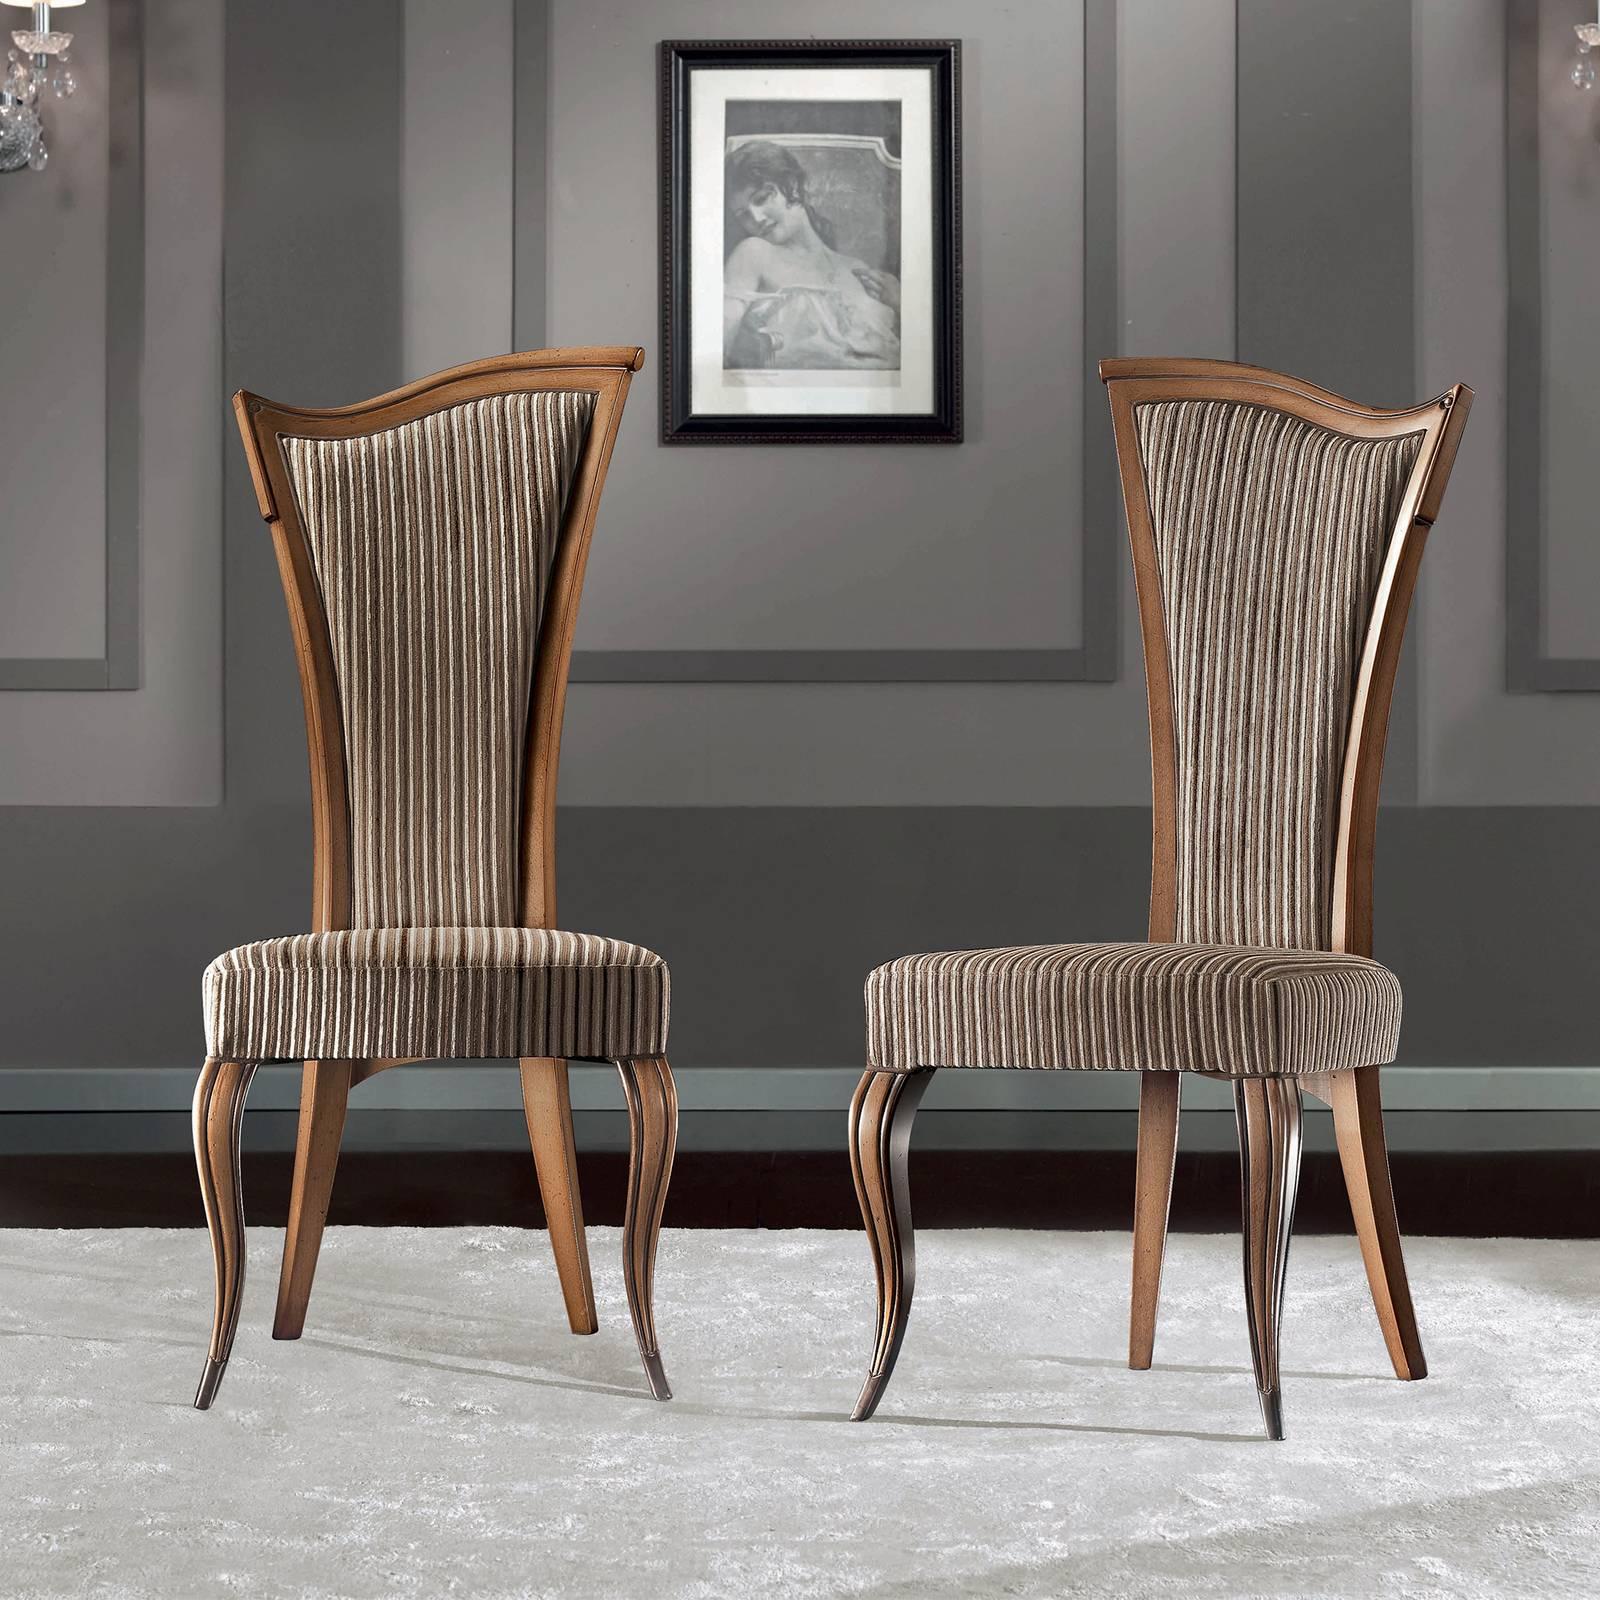 Baroque style meets Art Deco imagination in this sophisticated set of chairs that will transform any space with their timeless elegance. The contemporary silhouette features a tall, flared backrest with an asymmetrical top rail angled upwards. The